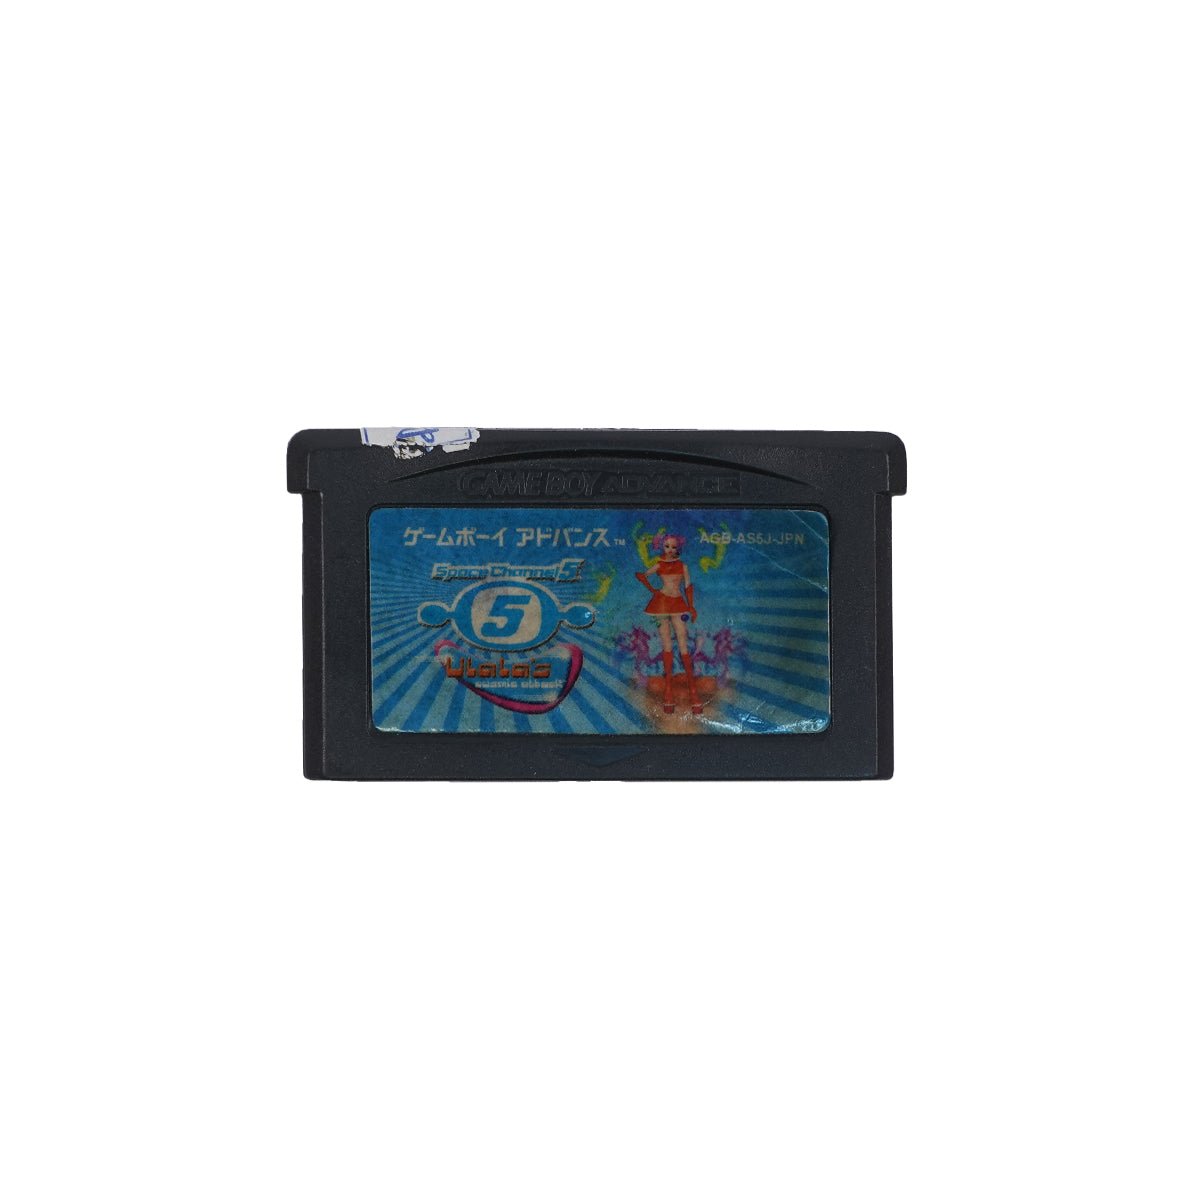 (Pre-Owned) Space Channel 5: Ulala's Cosmic Attack - Gameboy Advance - ريترو - Store 974 | ستور ٩٧٤